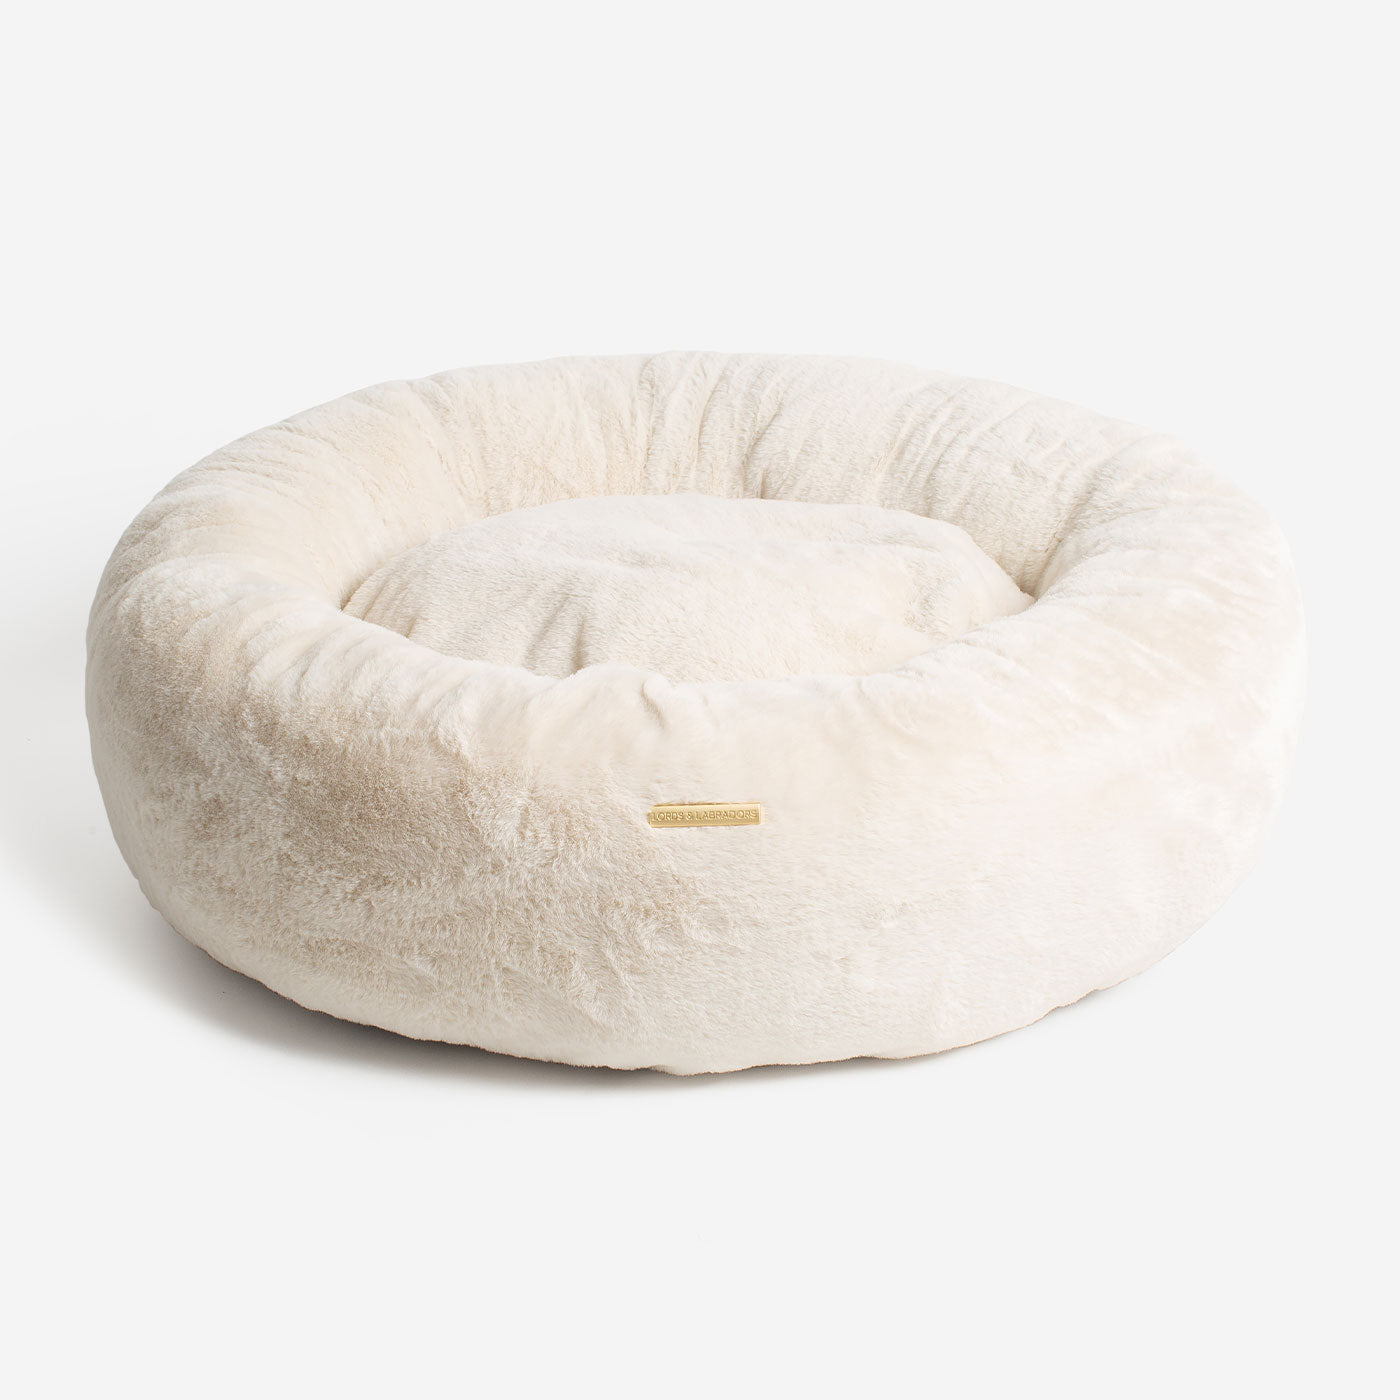 Luxury Donut Anti-Anxiety Dog Bed, In Stunning Cream Faux Fur, Perfect For Your Pets Nap Time! Available Now at Lords & Labradors 